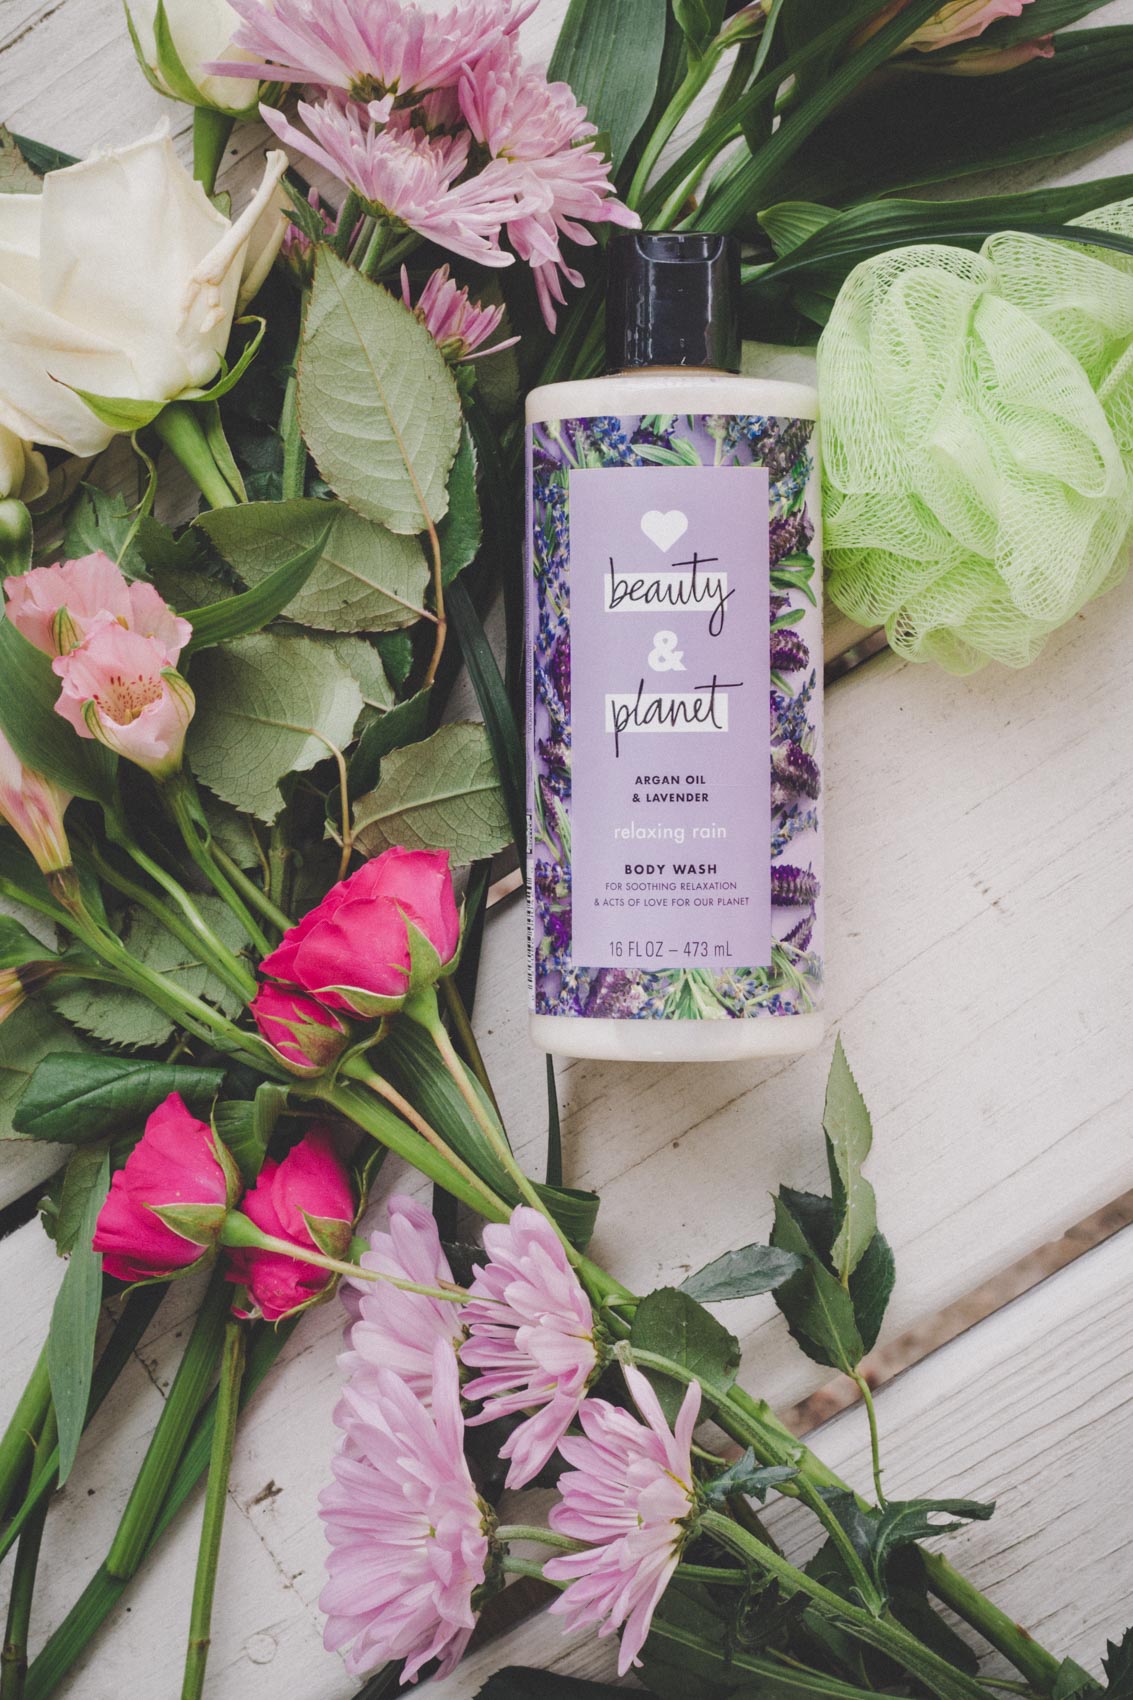 This Argan Oil & Lavender Body Wash from Love Beauty and Planet has become my favorite way to end the day. The aroma is dreamy and I instantly feel more relaxed when I smell it. I love the subtle scent and smooth, silky feeling it leaves my skin with, too!